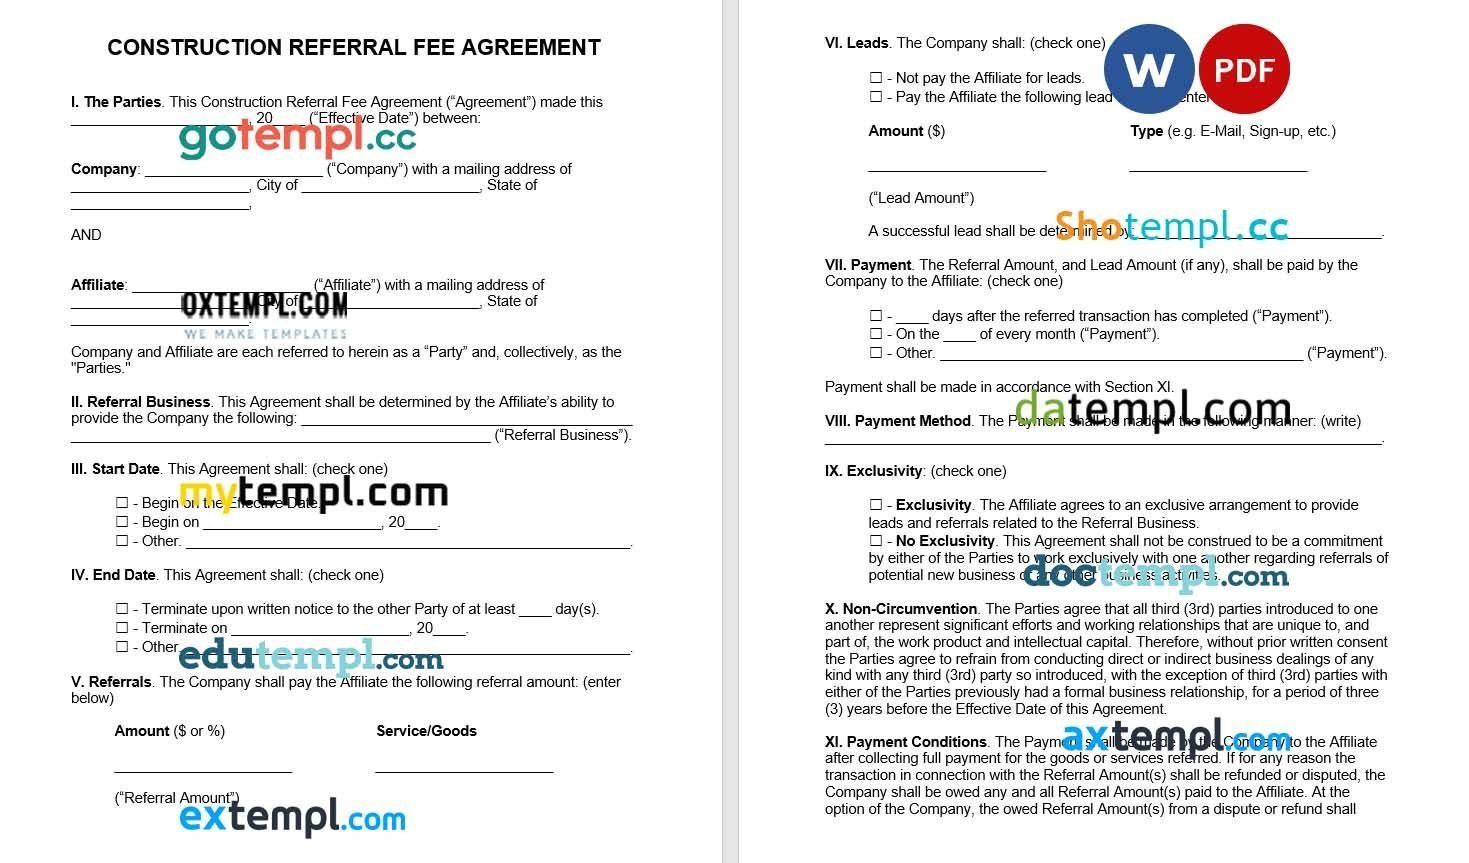 Construction Referral Fee Agreement Word example, fully editable